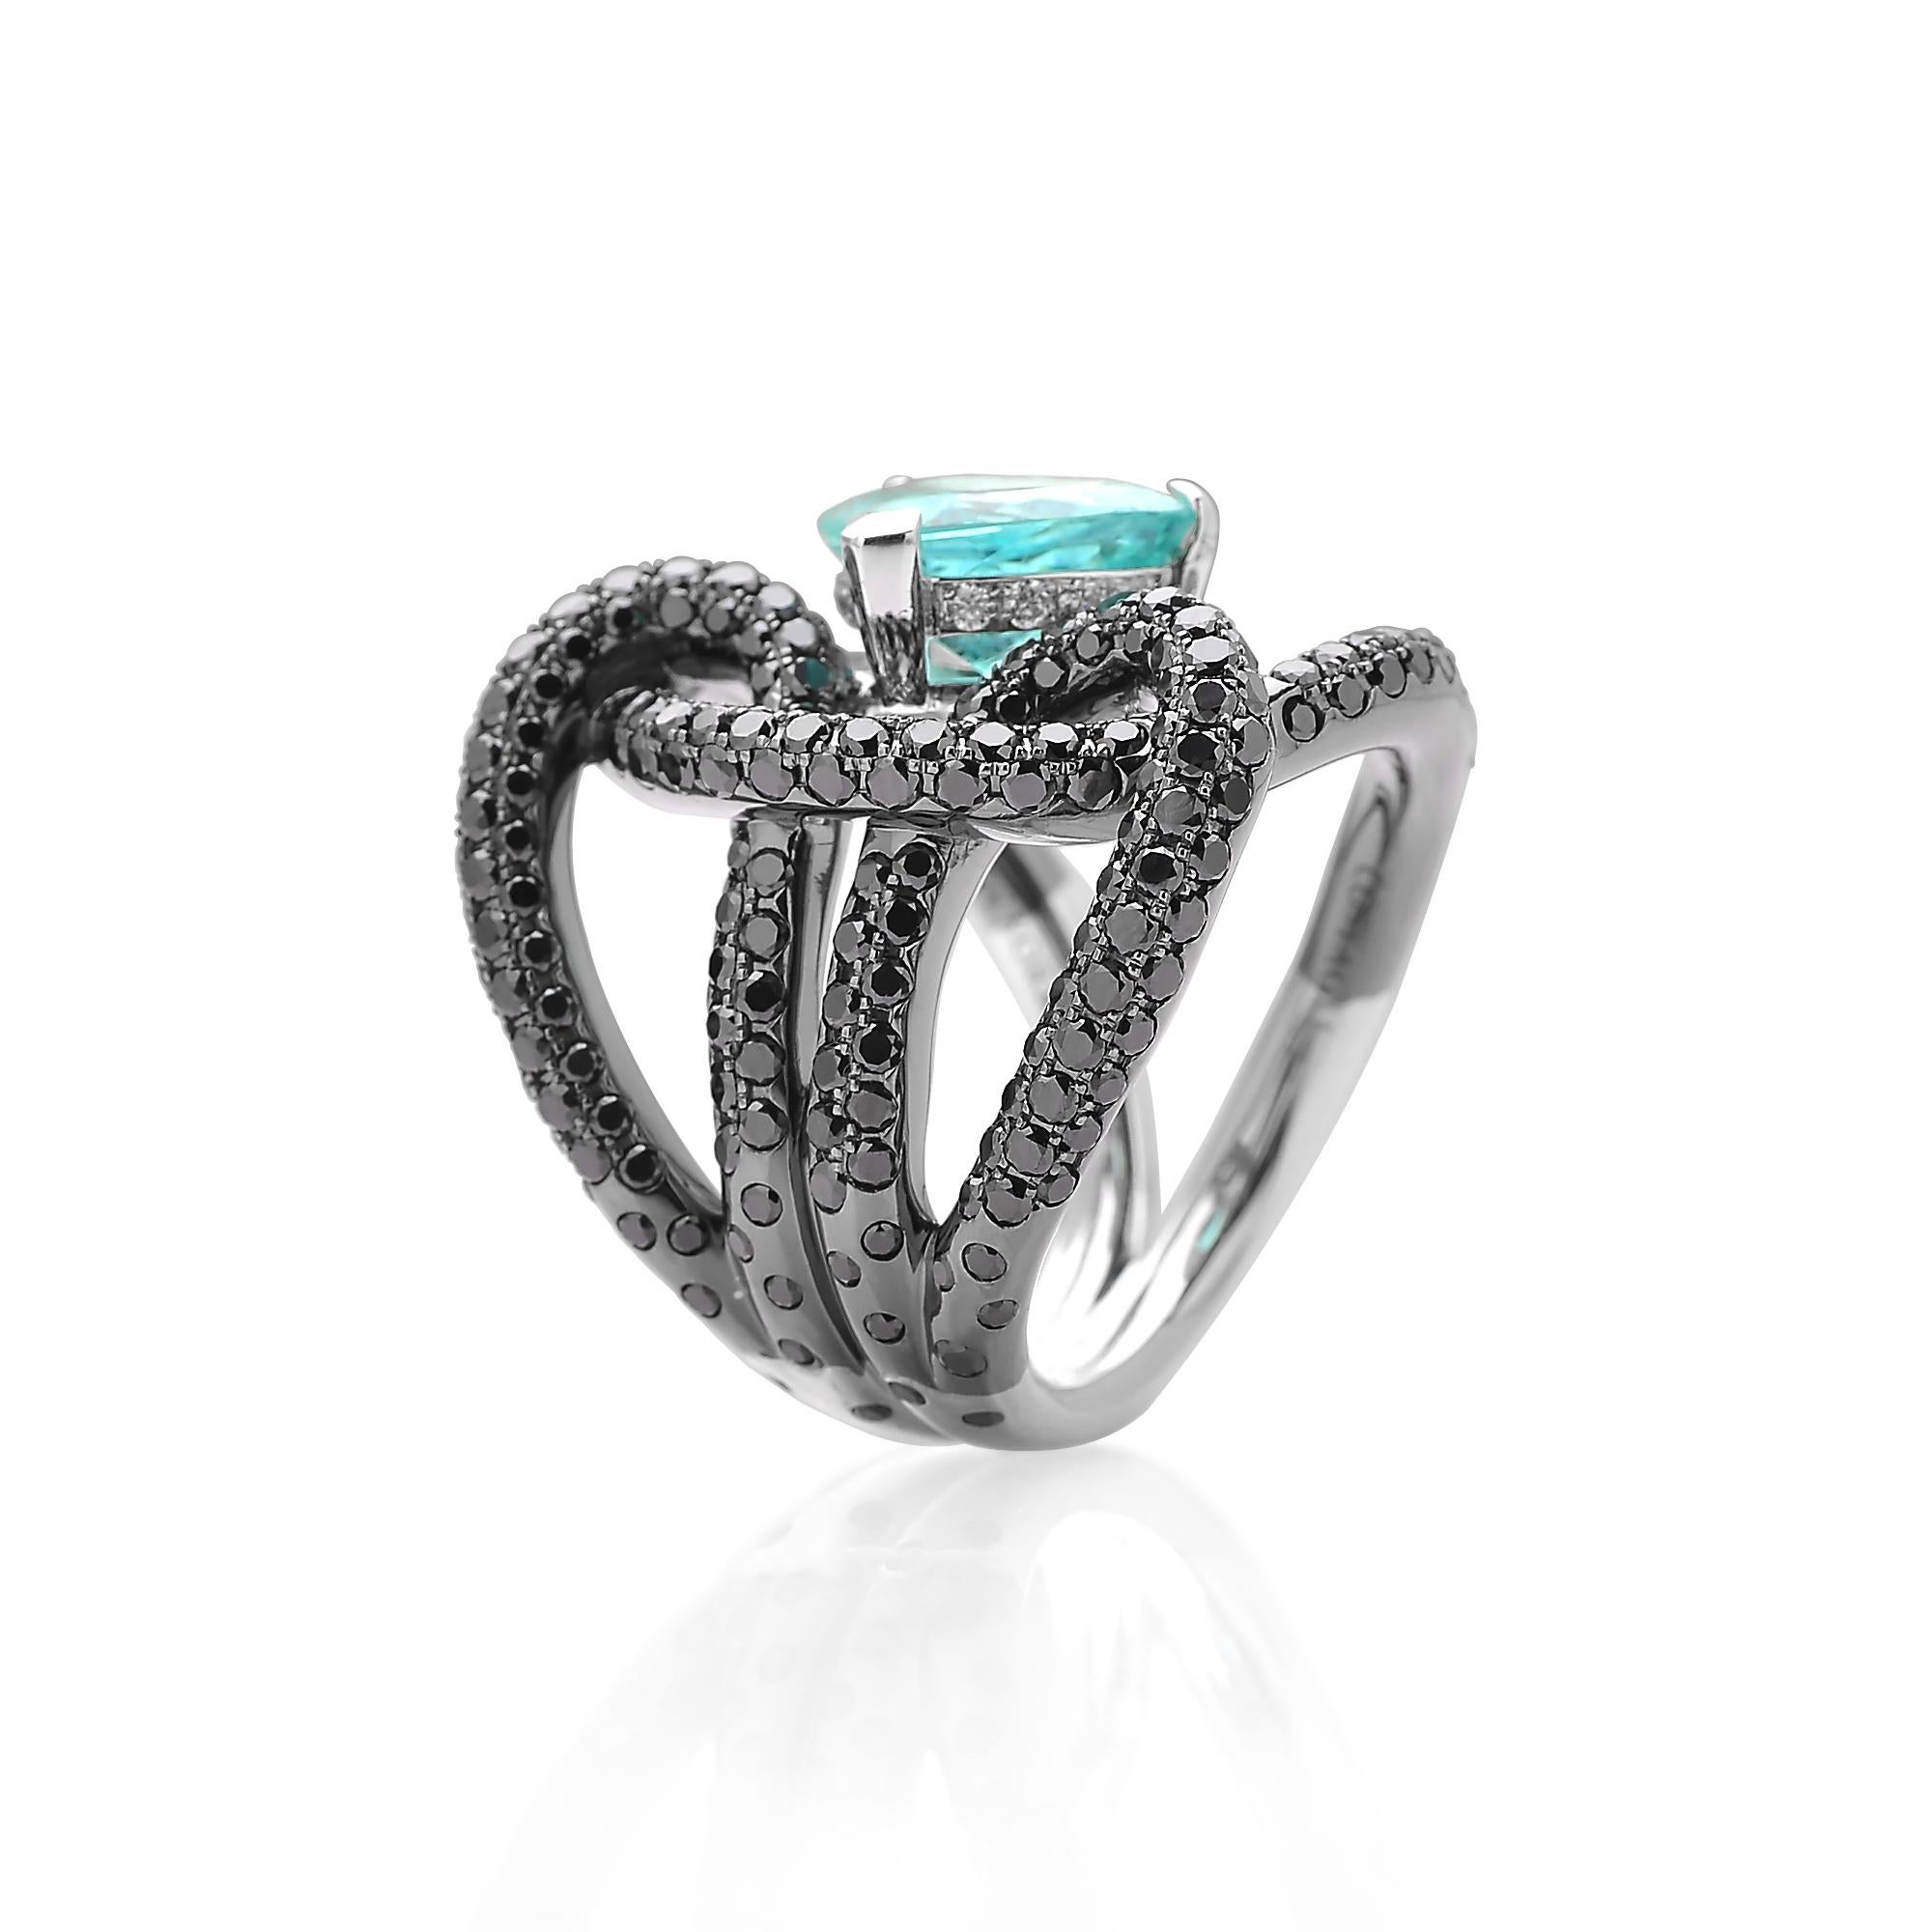 From the 'Intrecci' Collection, one-of-a-kind trillion shape paraiba-type ring set in 18 karat white gold with black rhodium finish and pave-set black diamond detailing. 

The beauty is in the details - from the combination of beauty is in the